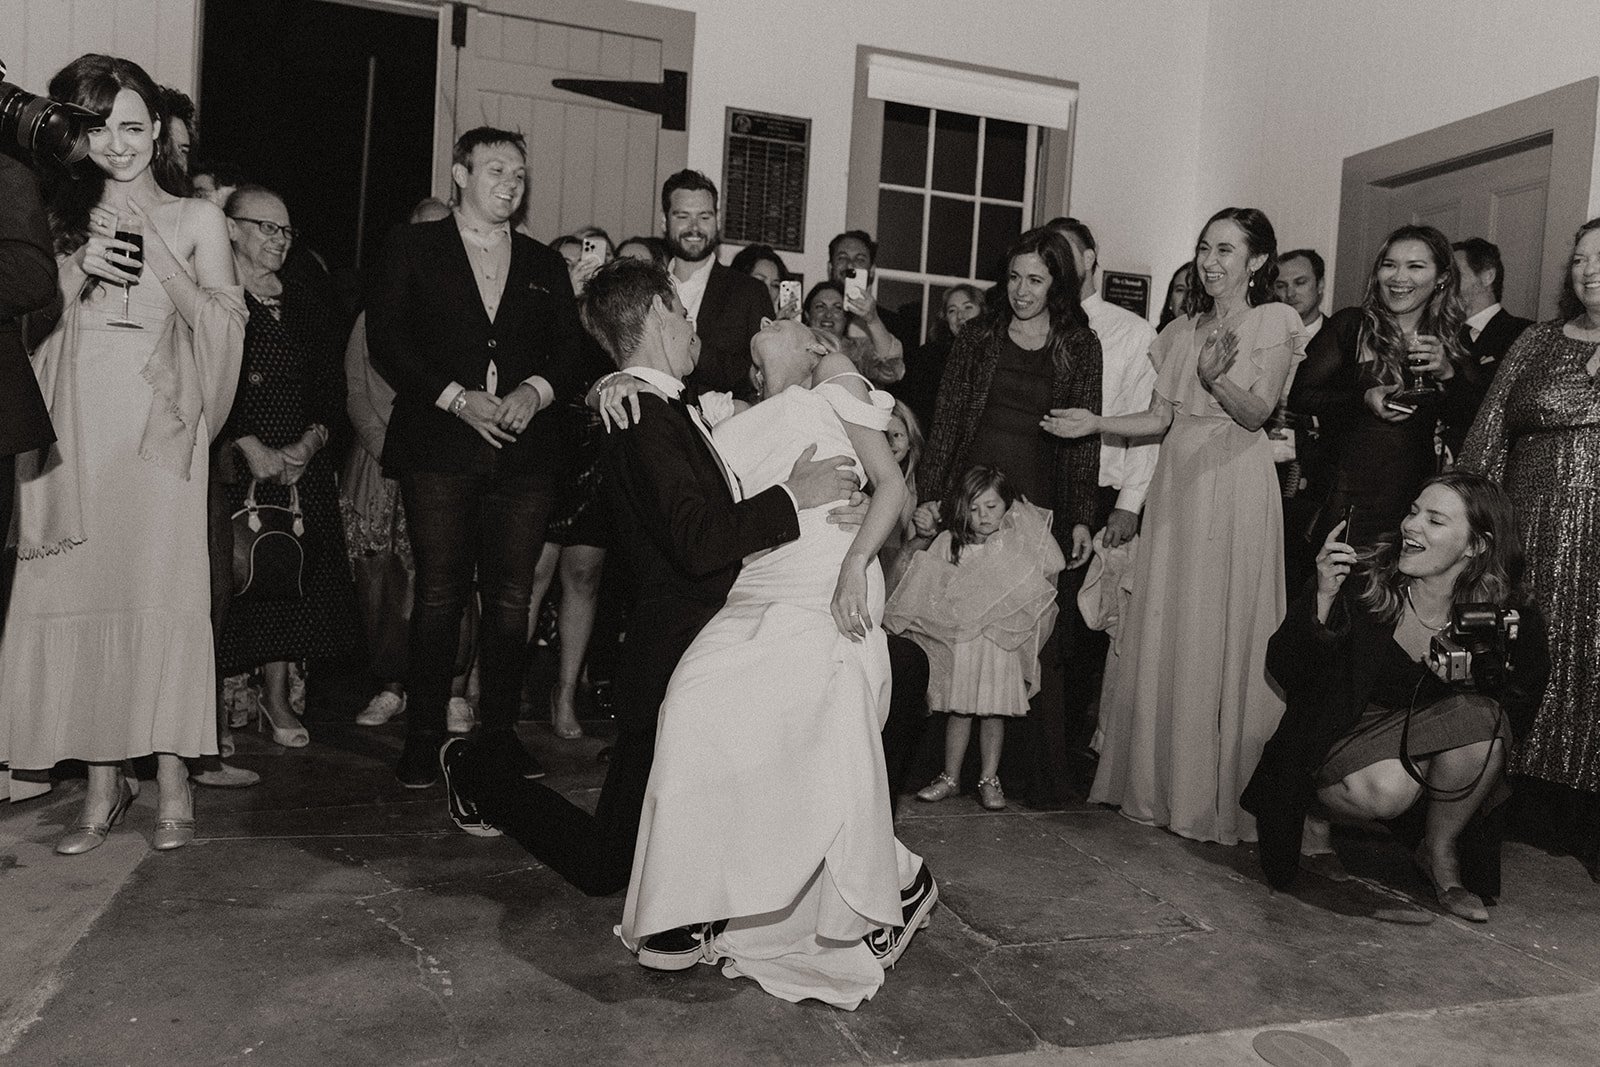 Bride and groom dancing on the dance floor during wedding reception in black and white